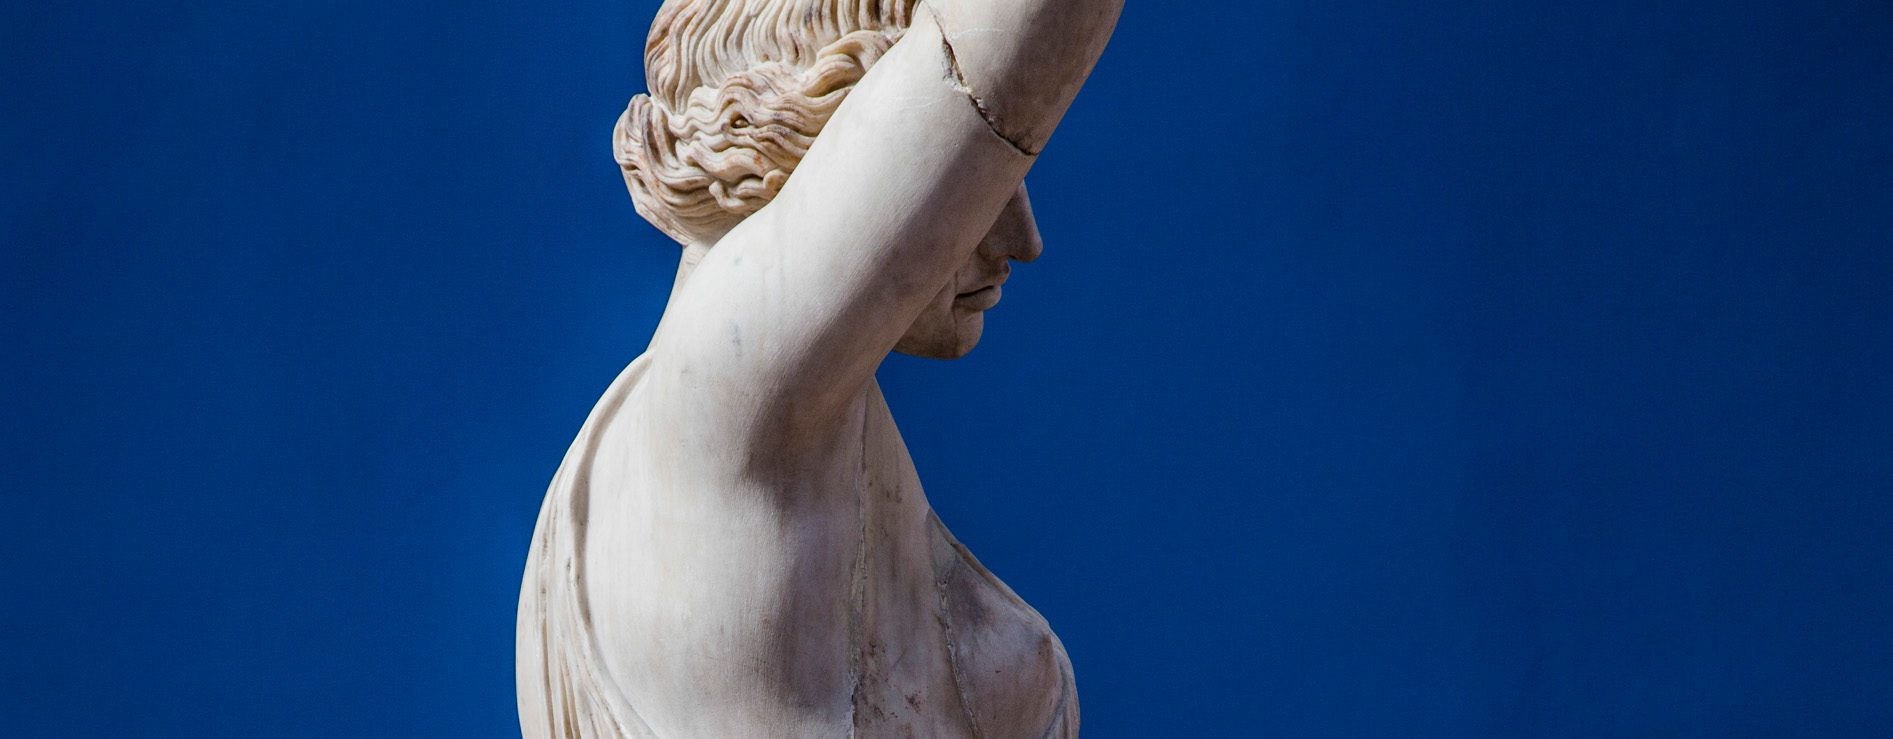 Greek And Roman Sculpture Experience The Exhibition At The Glyptotek